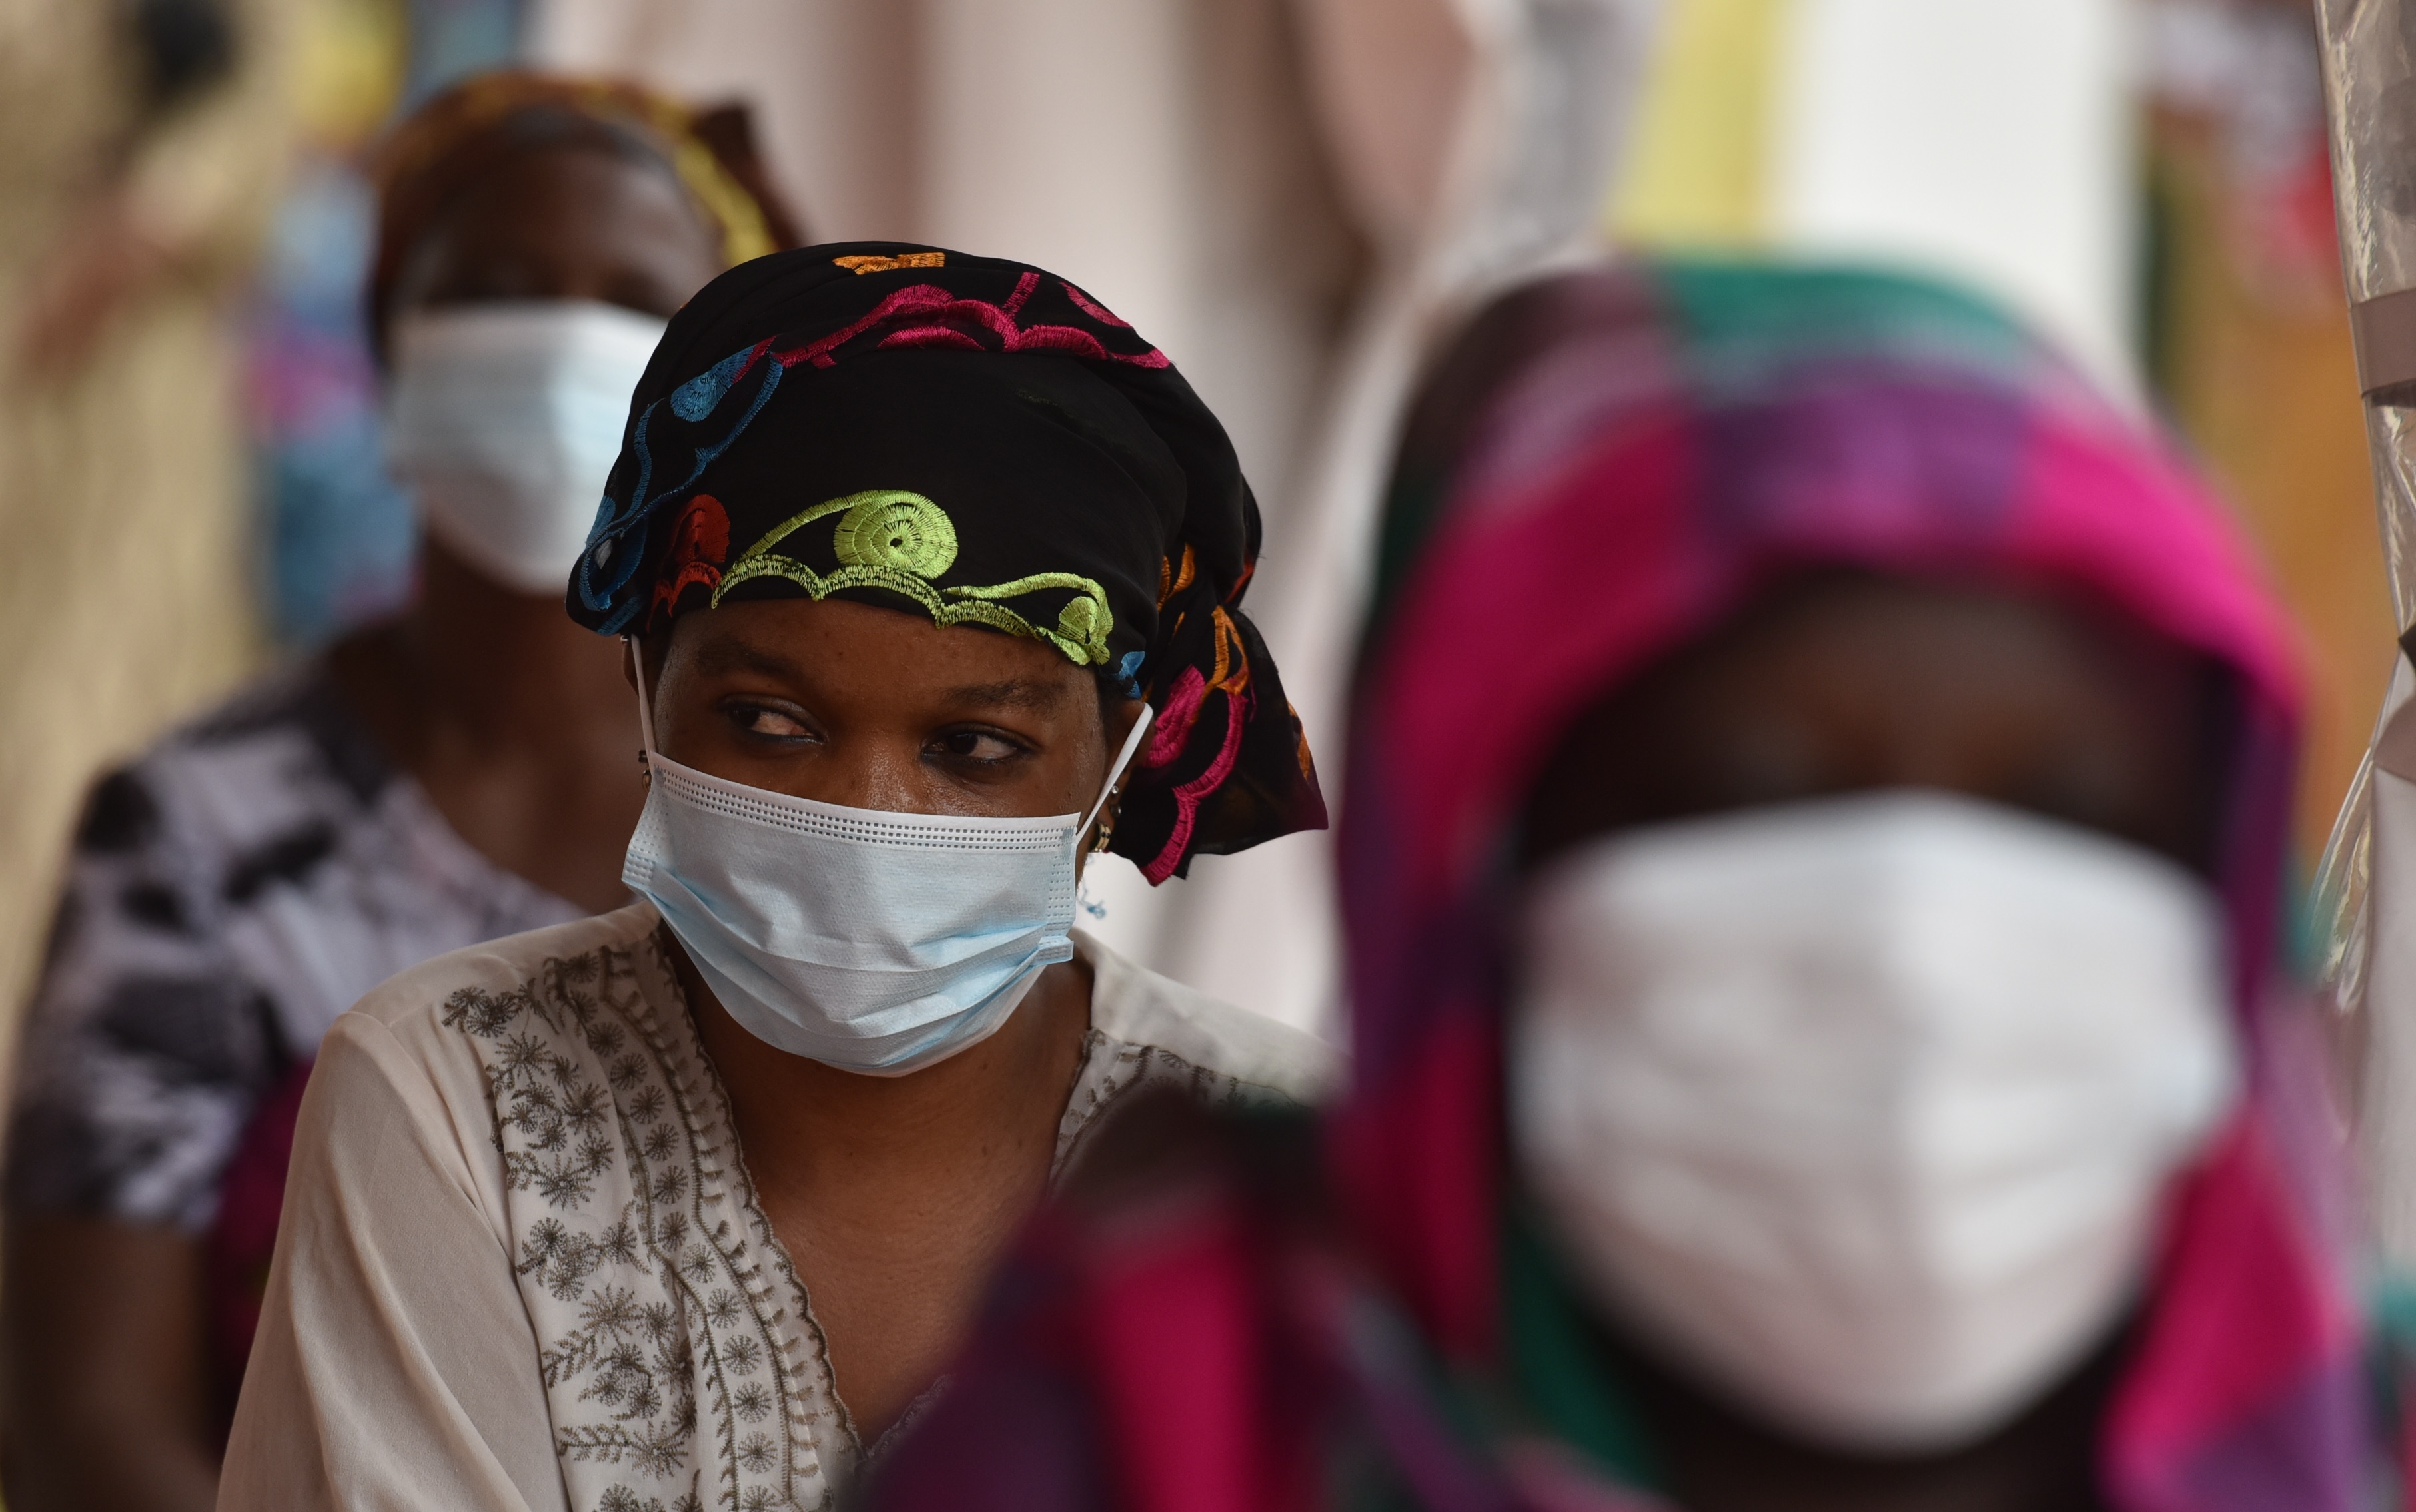 A woman wearing a face mask as a preventive measure against the spread of the COVID-19 coronavirus. (Photo by ISSOUF SANOGO/AFP via Getty Images)